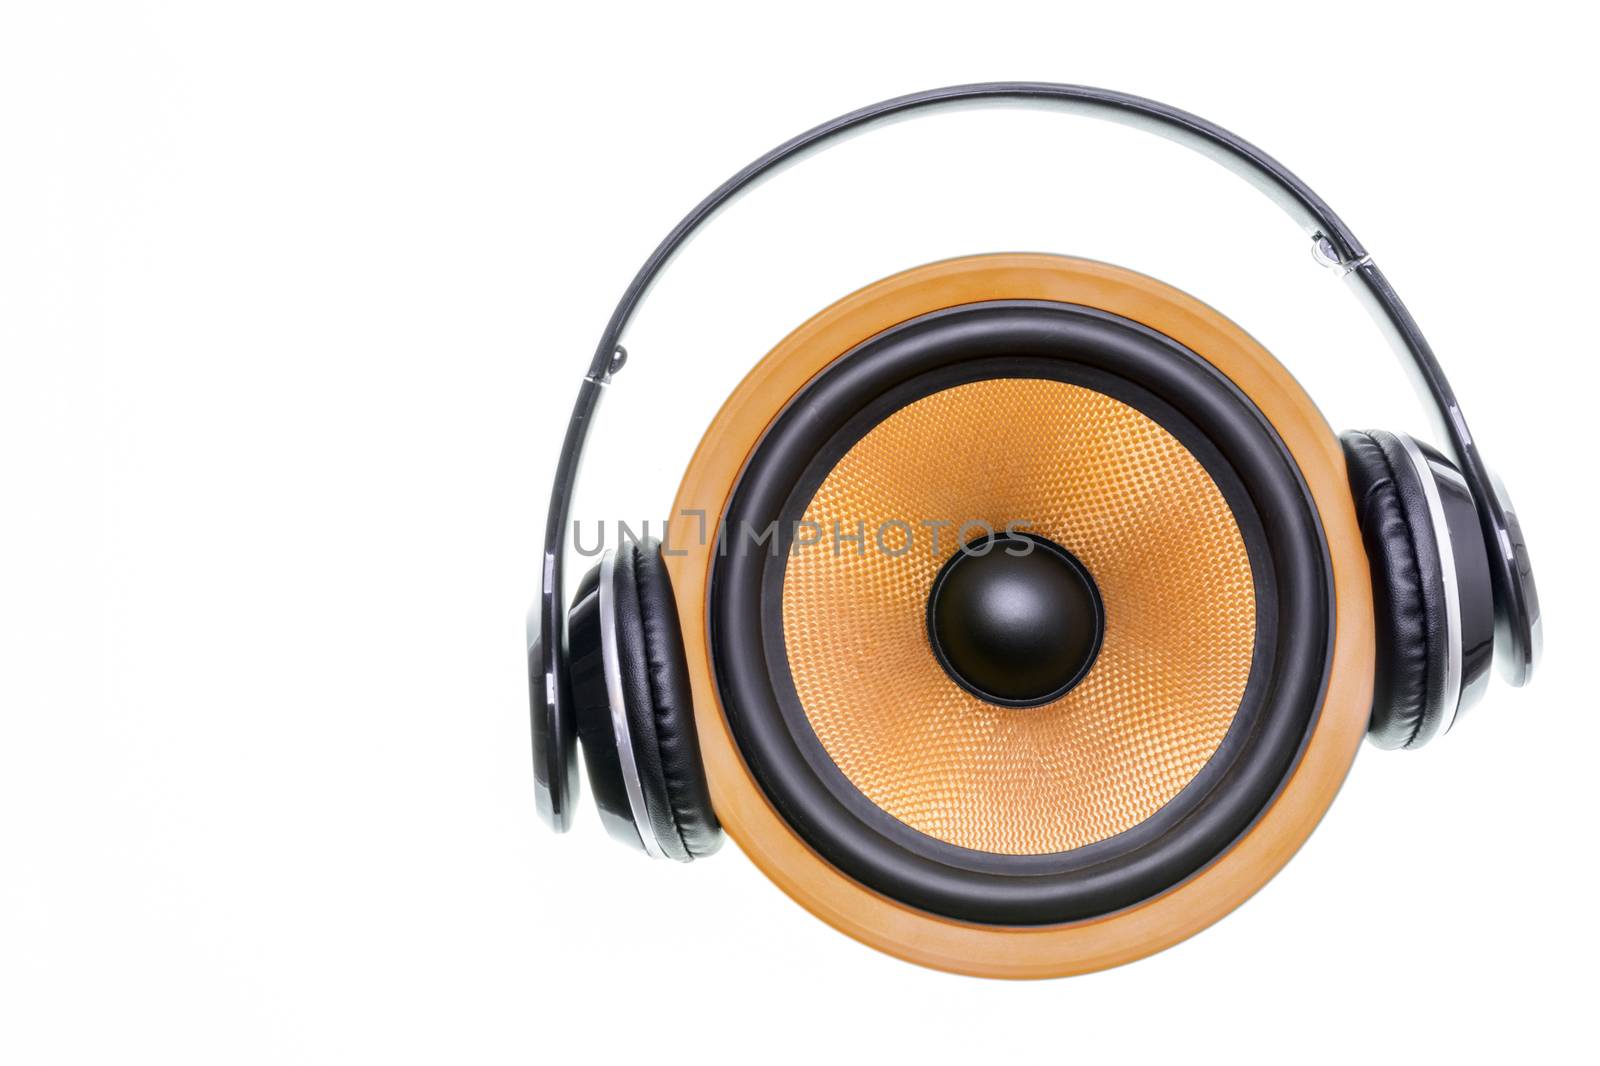 Loudspeaker word cloud concept with yellow woofer and headphones, related tags.
Loudspeaker concept with yellow woofer and headphones.
Blank area for text